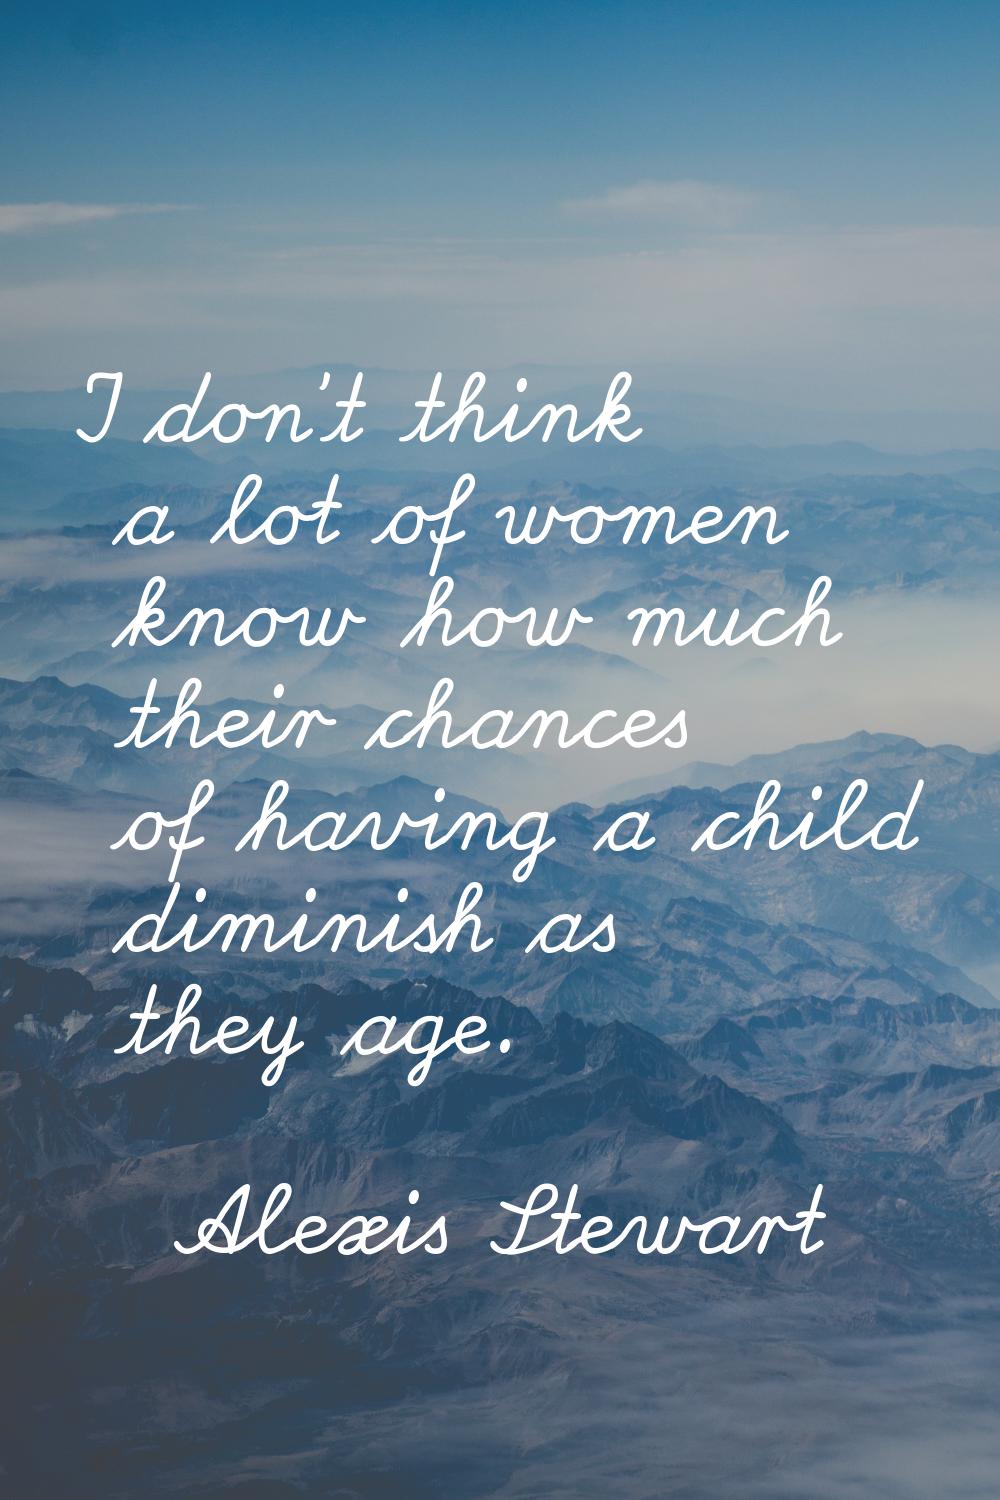 I don't think a lot of women know how much their chances of having a child diminish as they age.